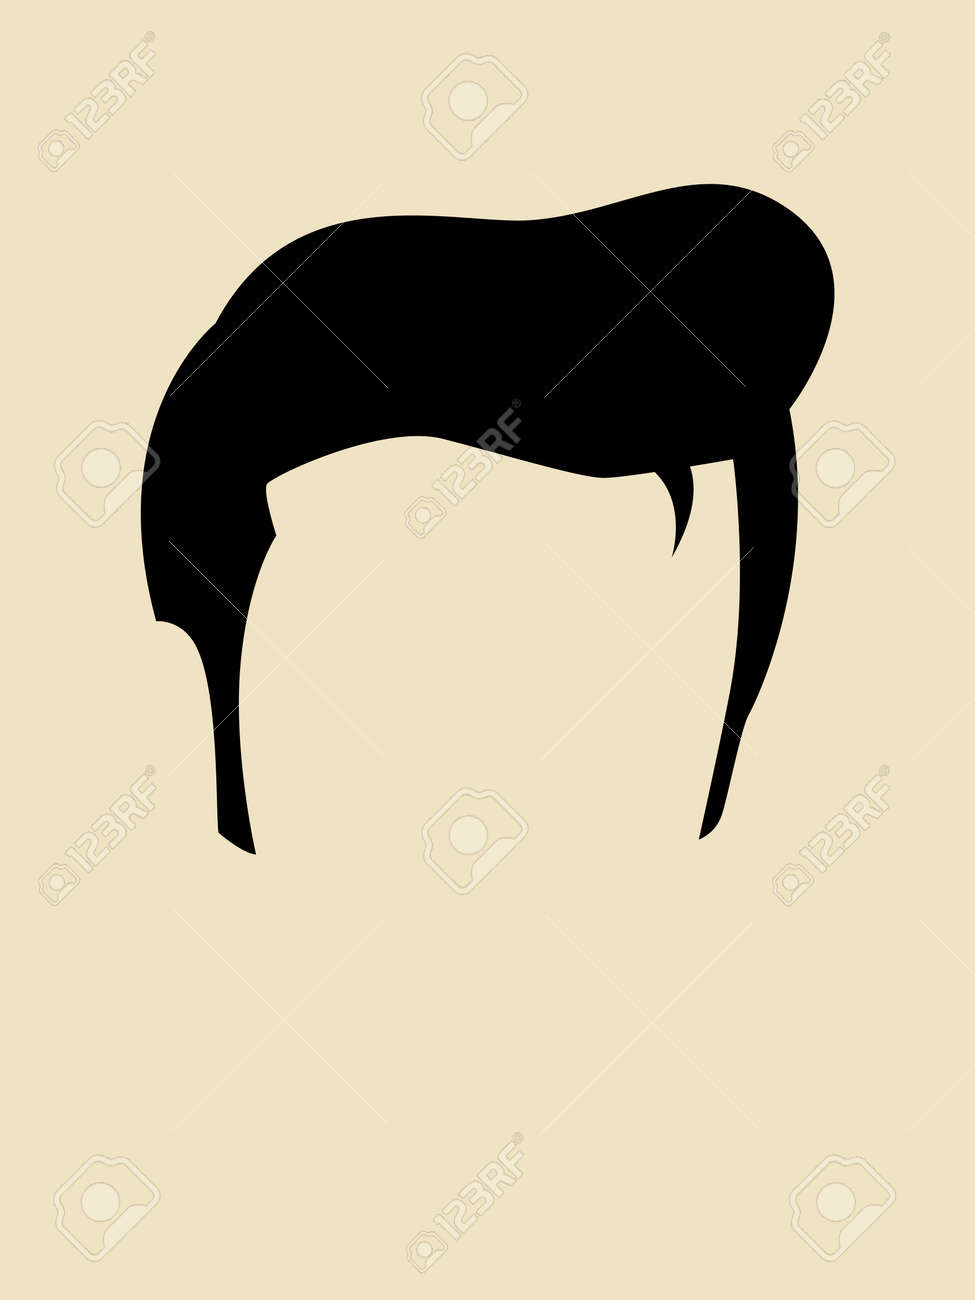 45727421-Simple-graphic-of-a-hairstyle-for-man-Stock-Vector-elvis.jpg